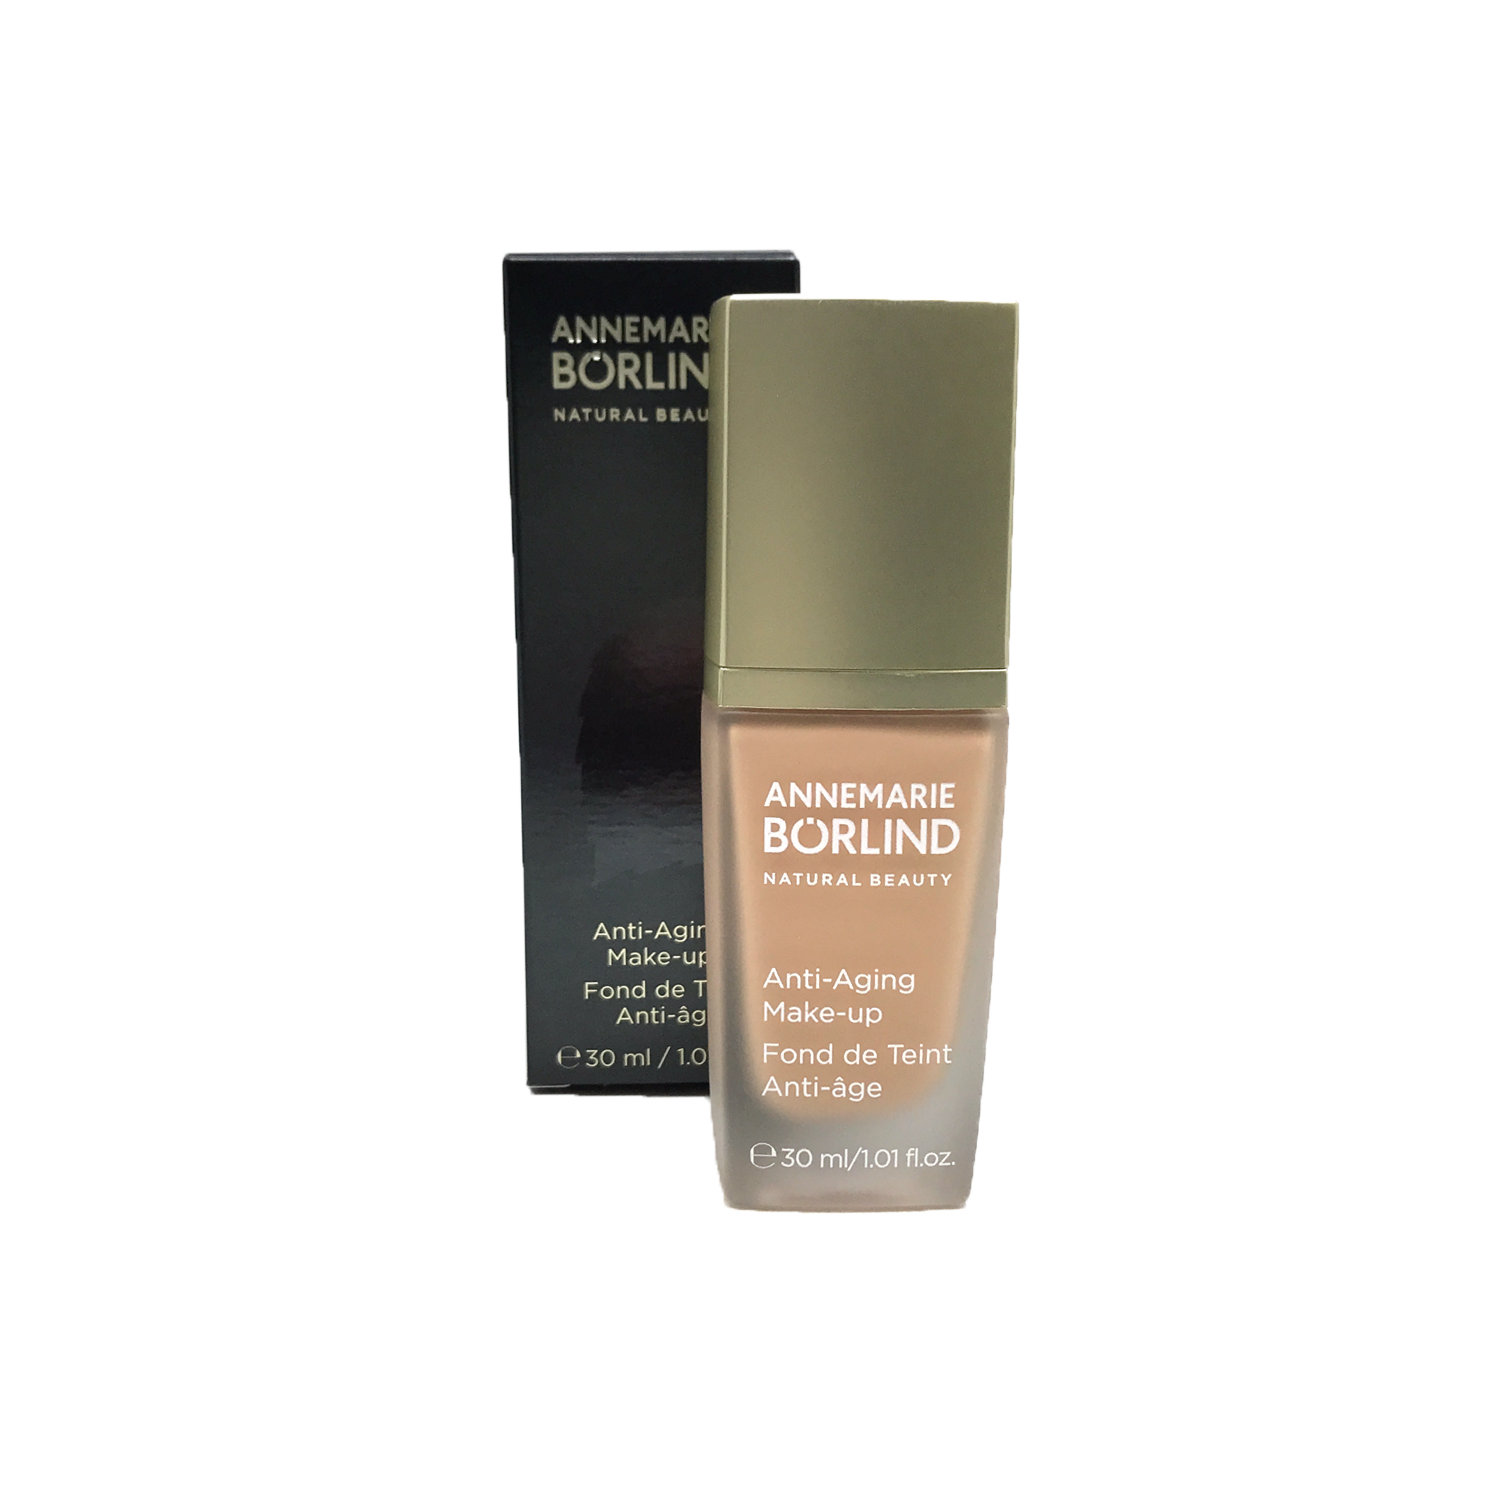 Annemarie Borlind Anti-Aging Make-up Almond 30ml (Discontinued- Replacement Coming Soon)